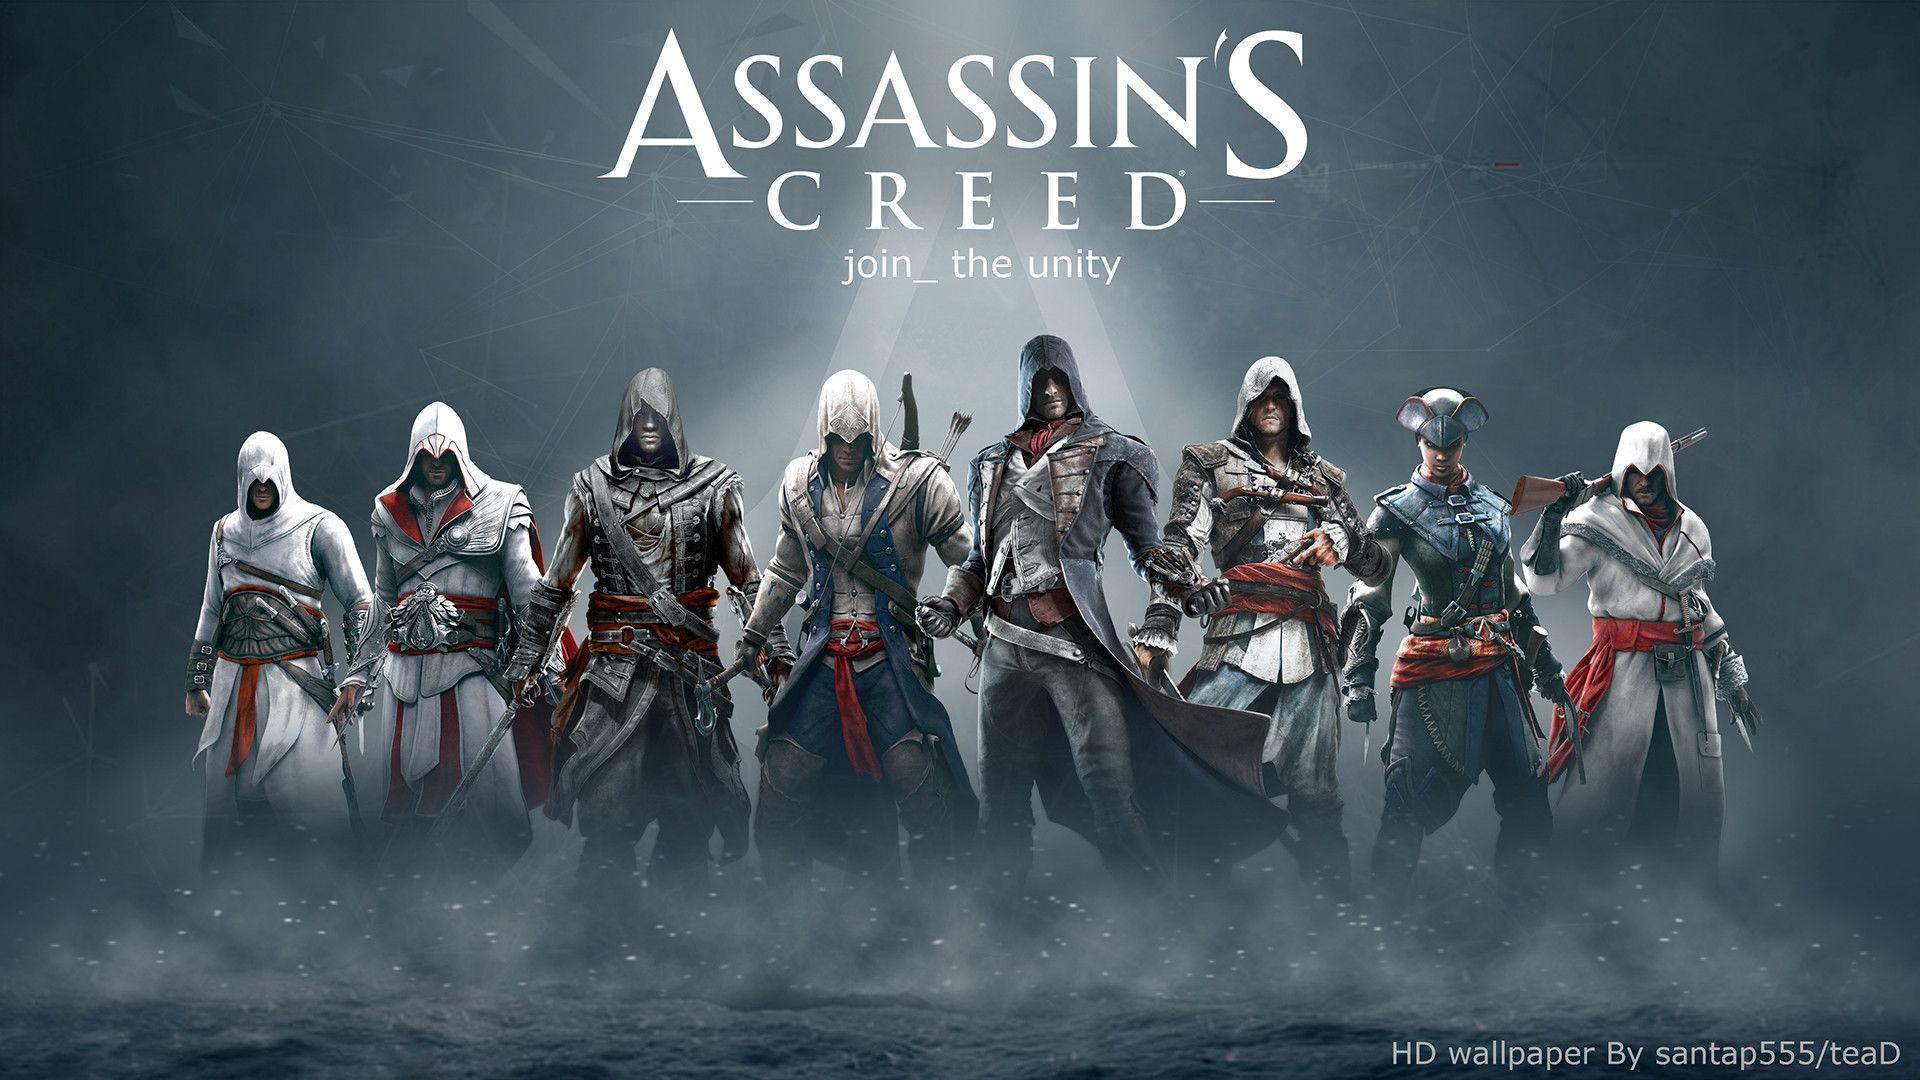 Assassin's Creed Laptop Wallpaper Free Assassin's Creed